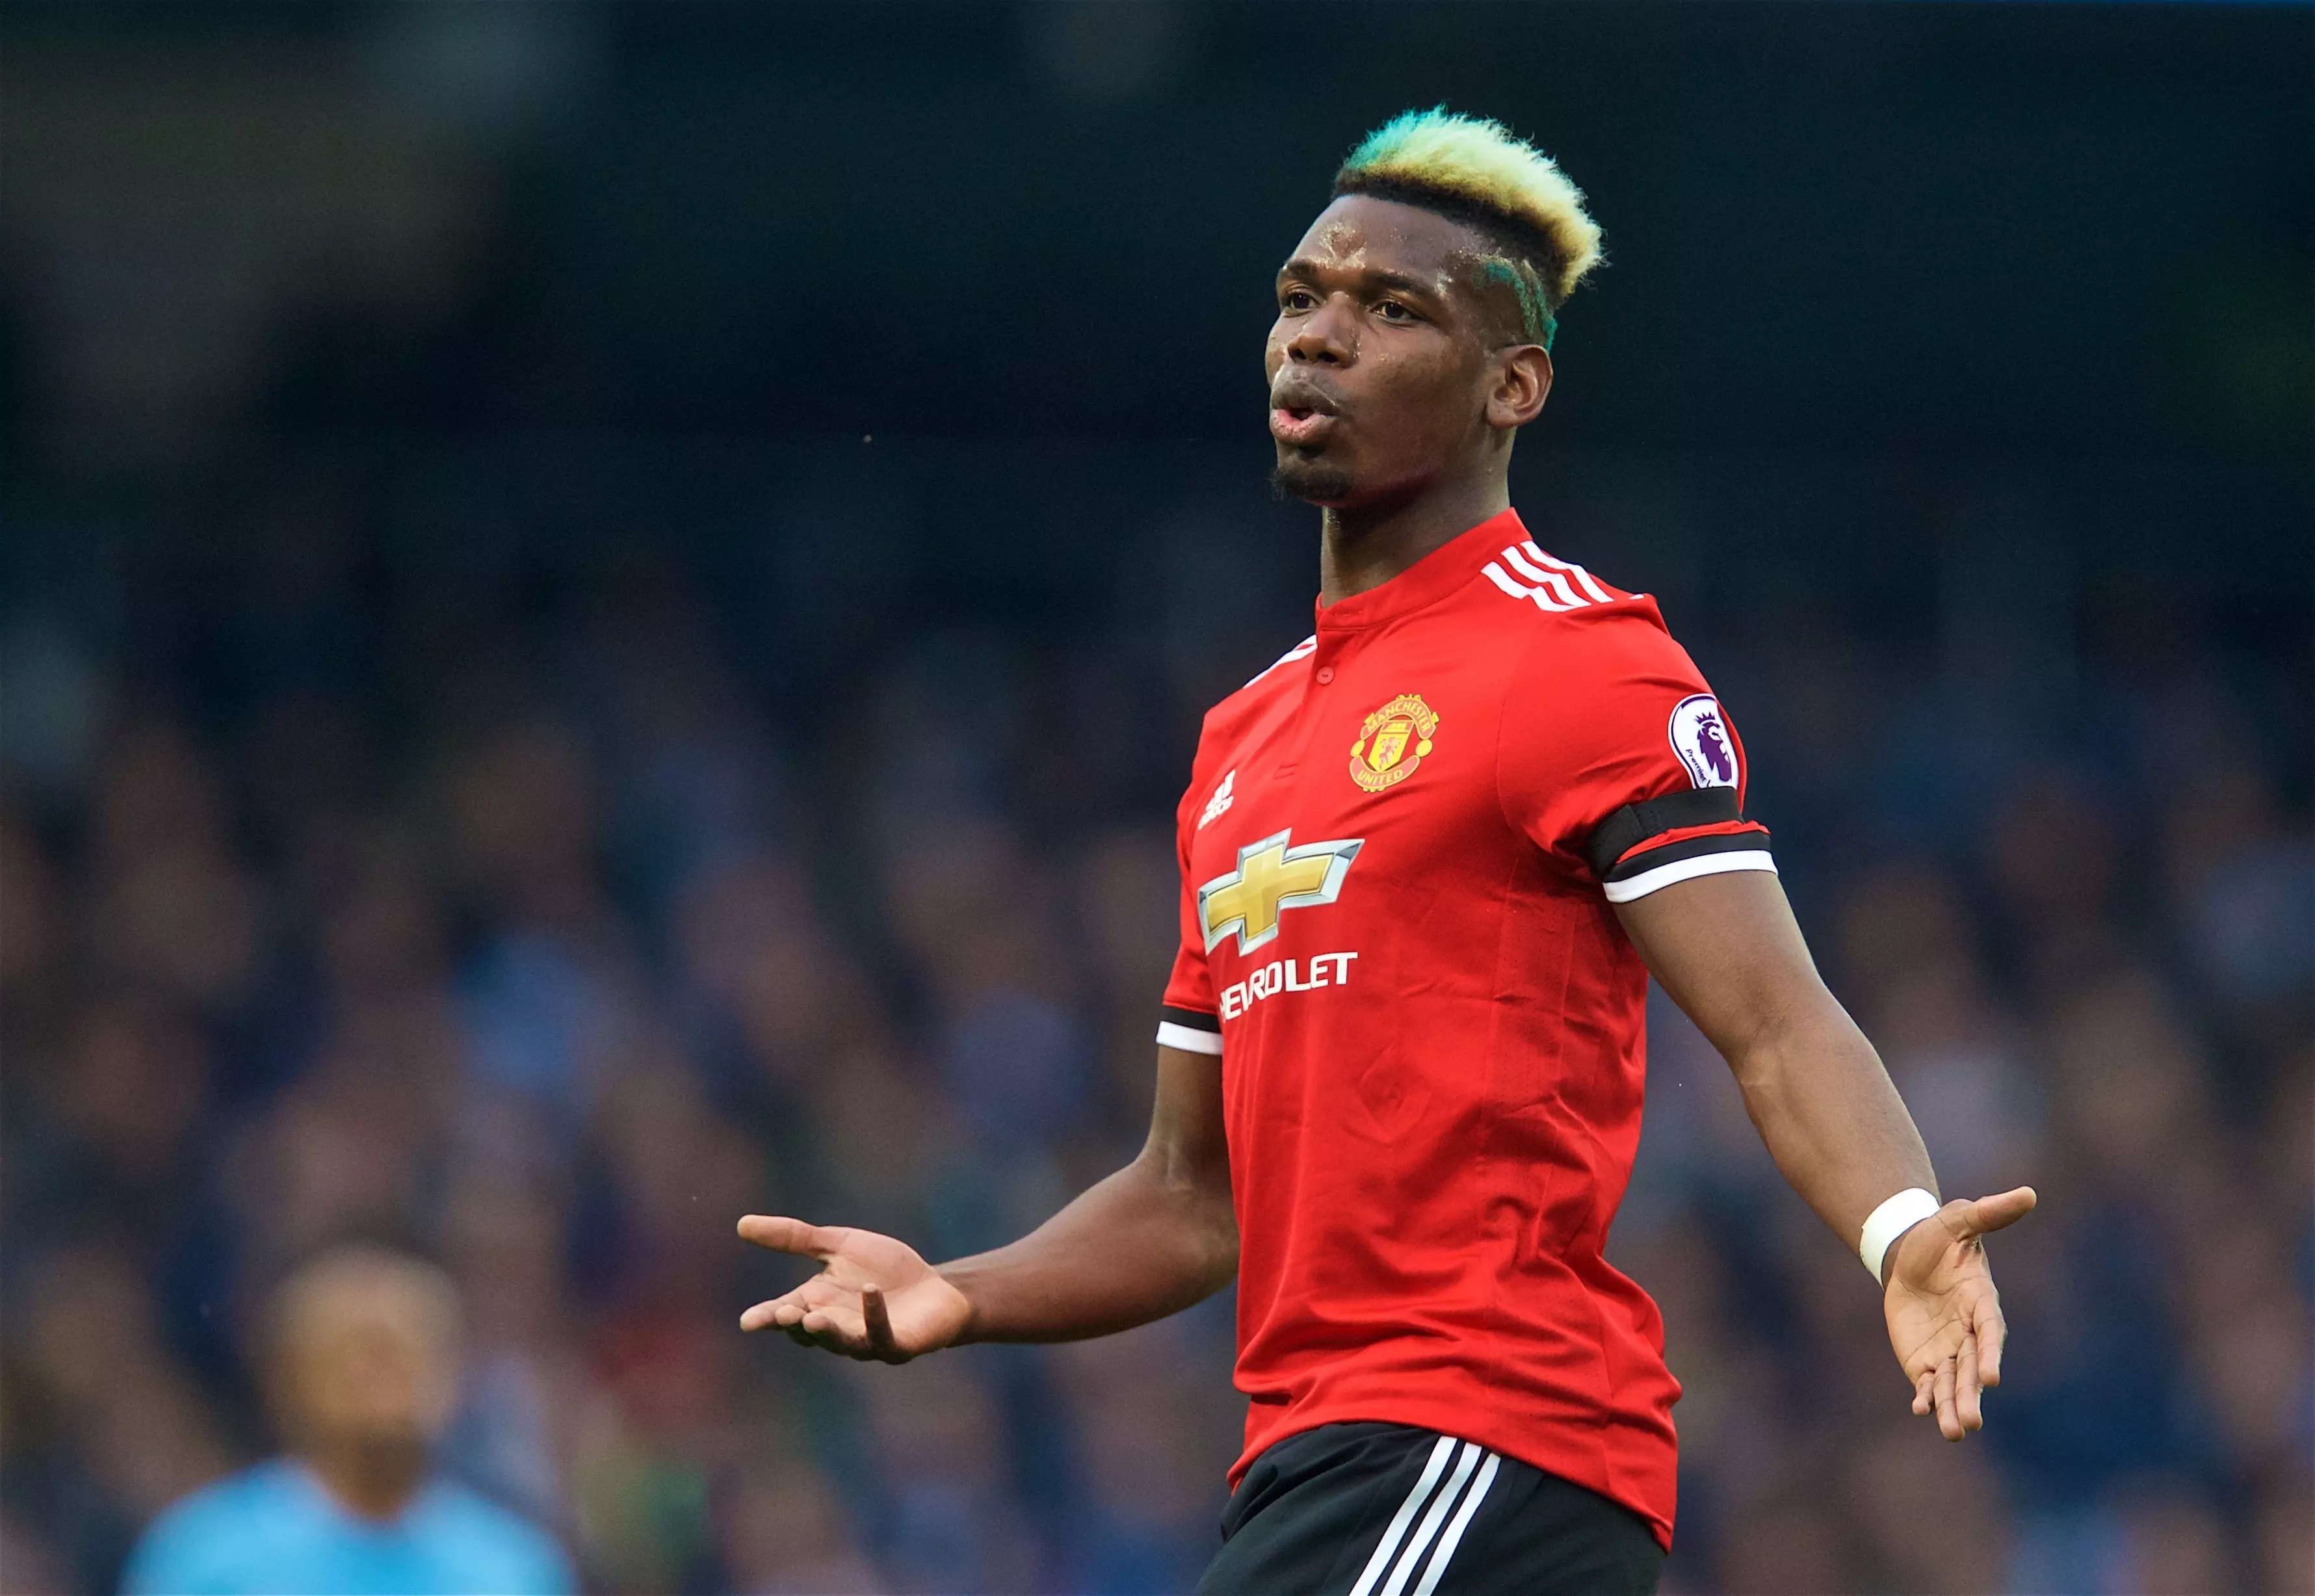 Pogba was poor at the weekend leading to rumours he could leave. Image: PA Images